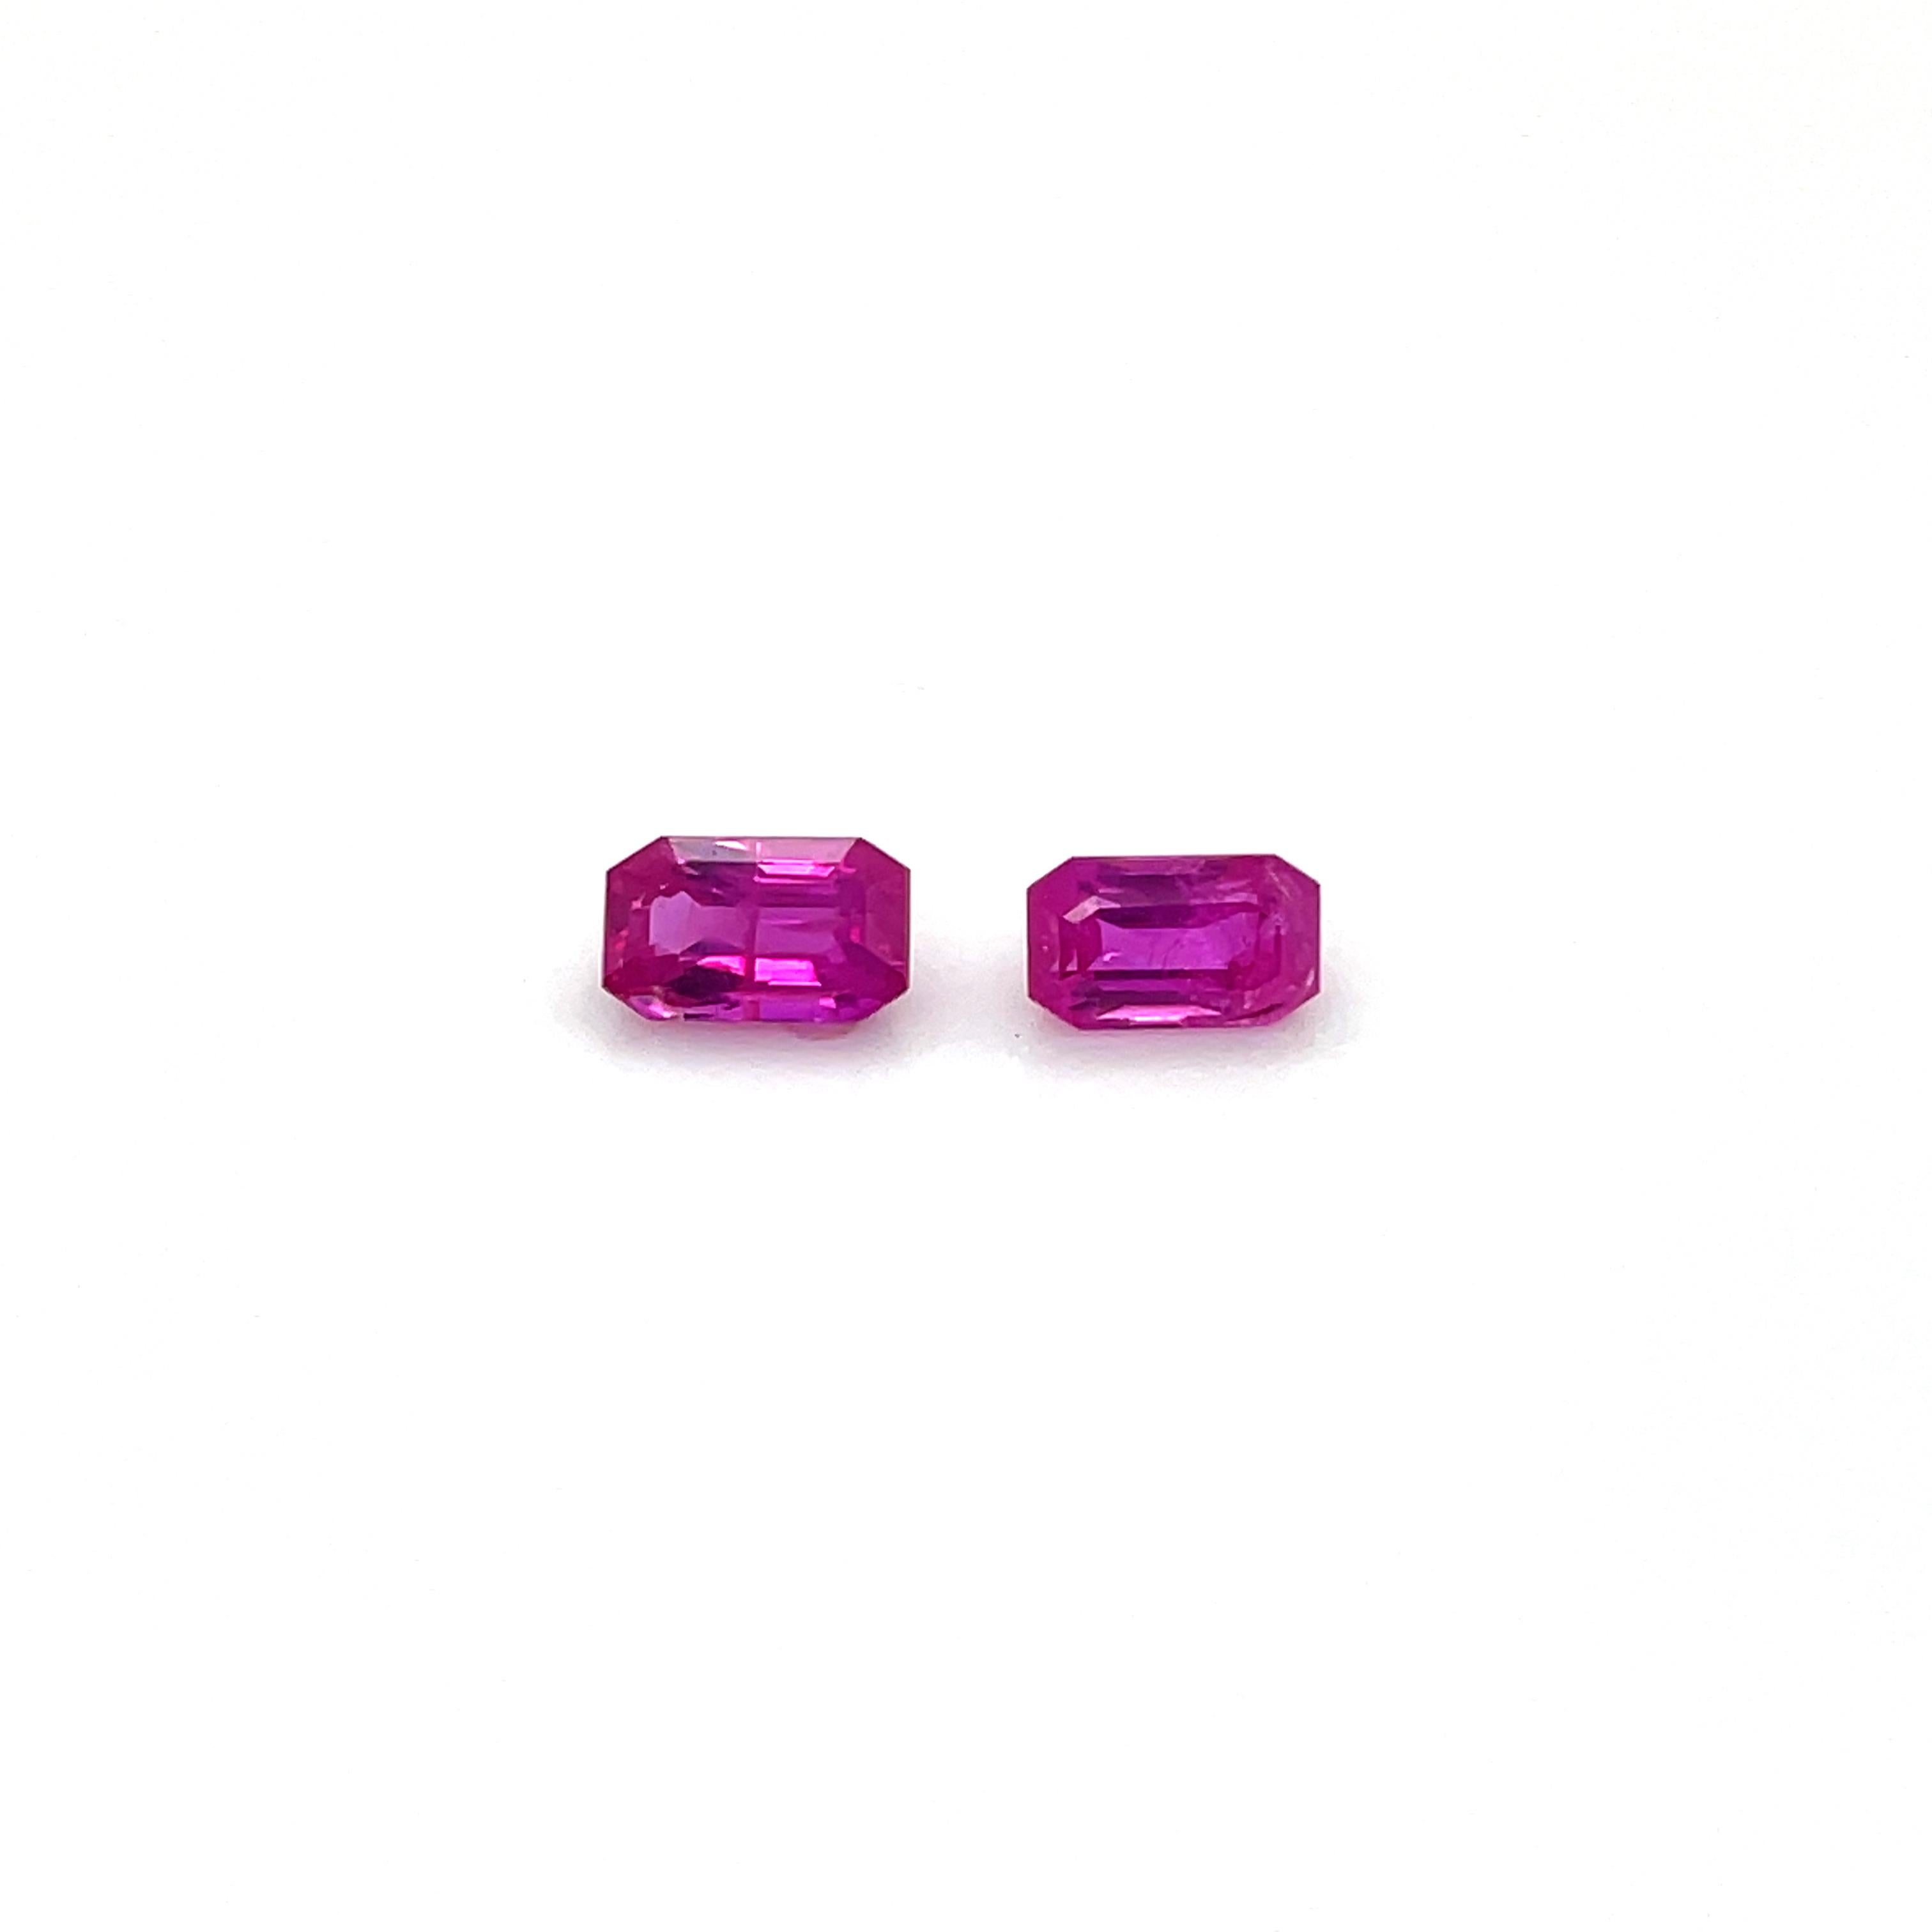 2 Rubies 2.22 Cts  For Sale 8